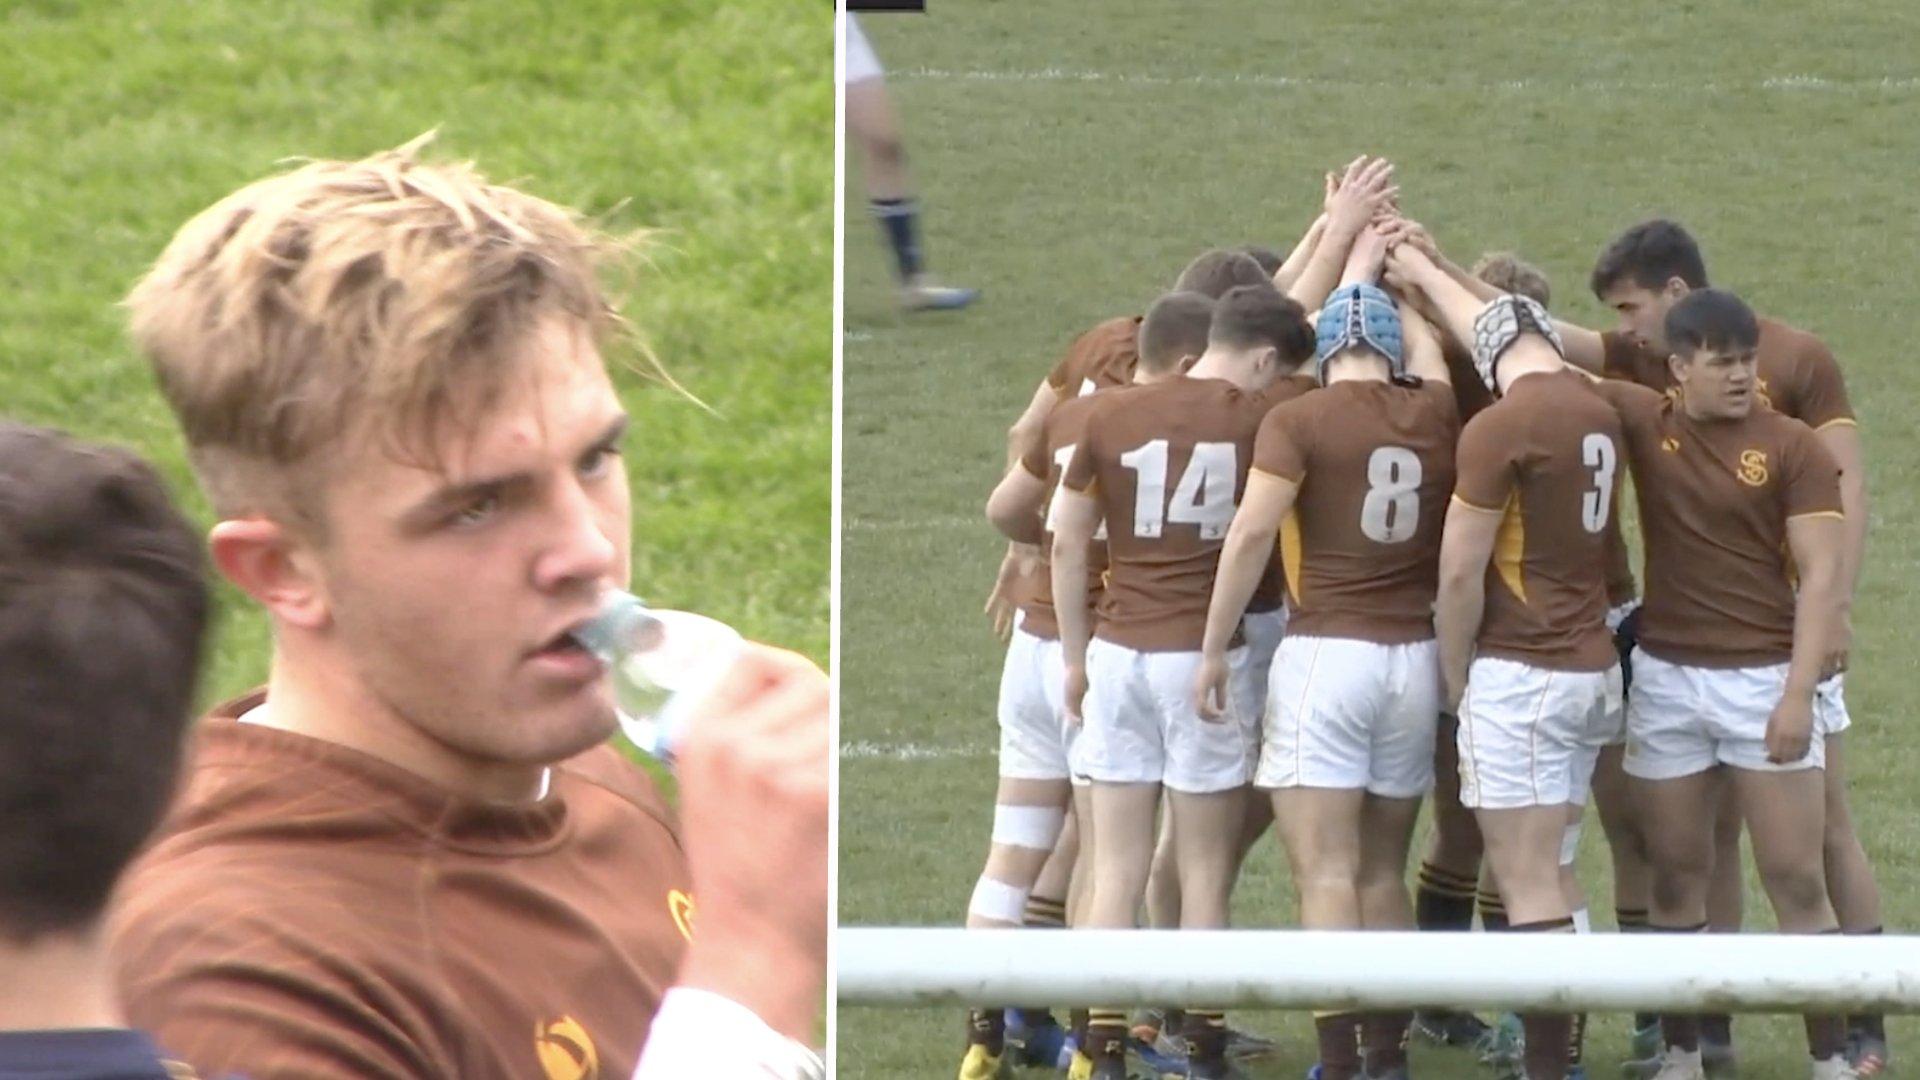 WATCH: An unbelievable highlight reel has just dropped on Sedbergh rugby and their double unbeaten season